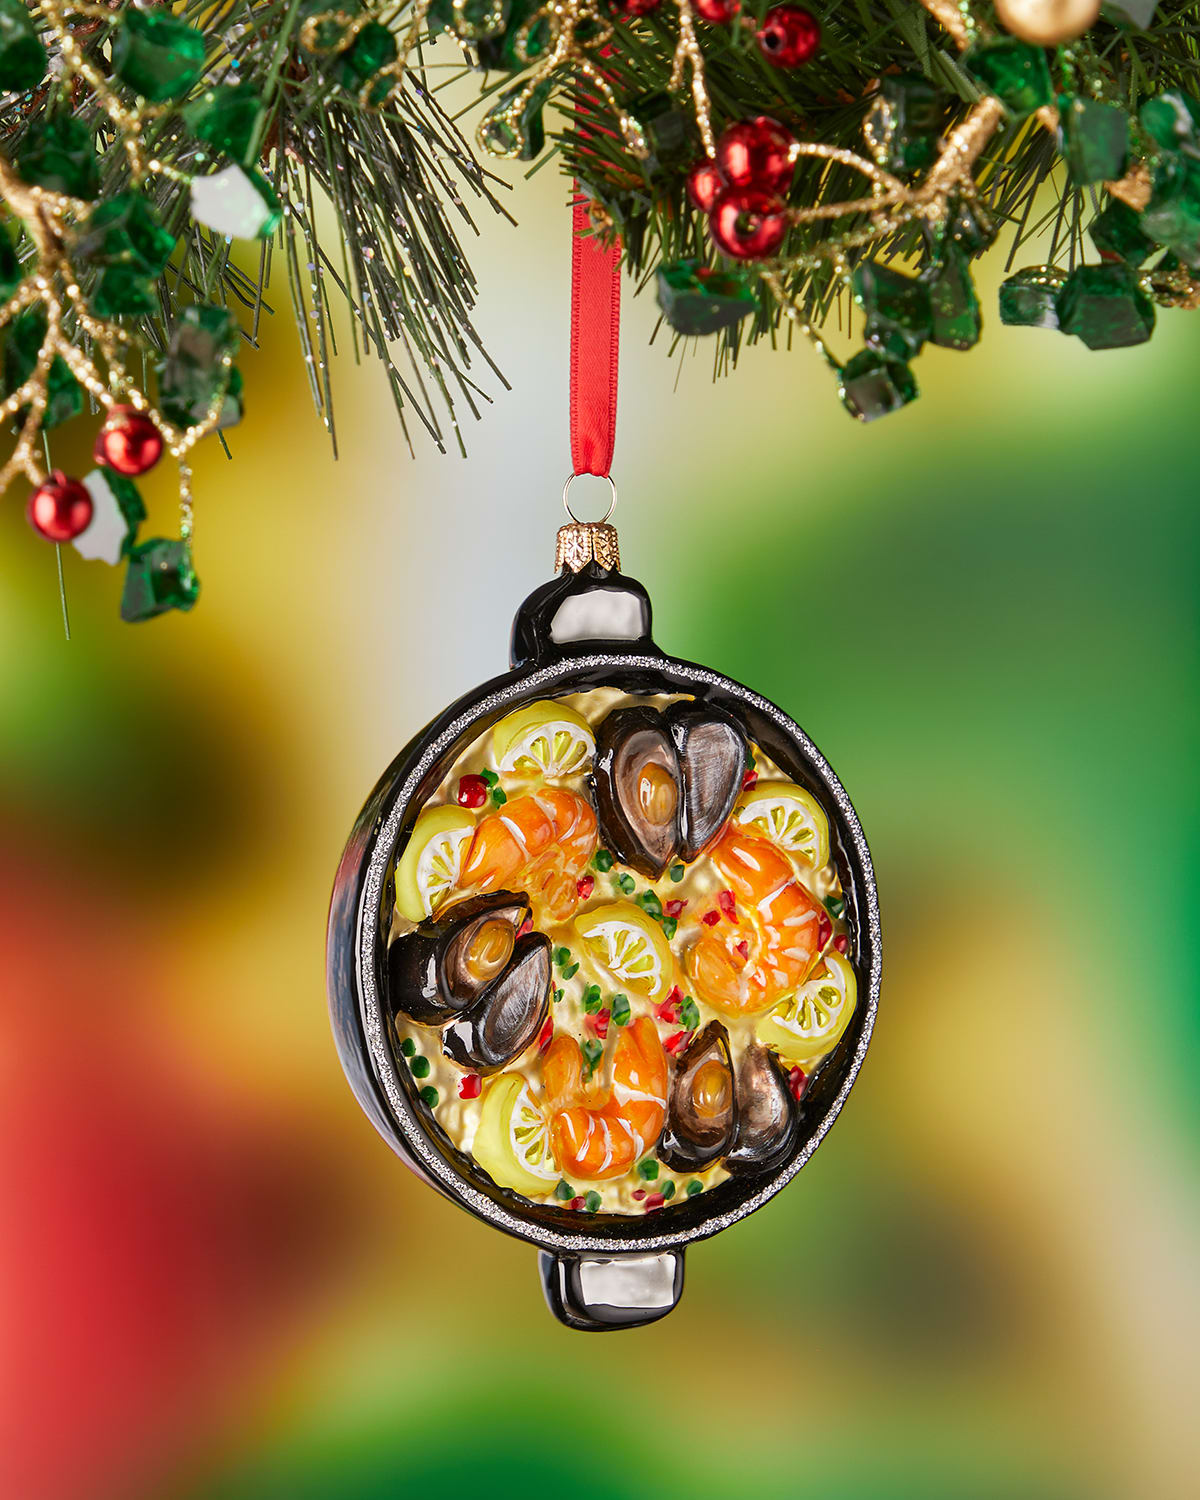 Paella Painted Holiday Ornament